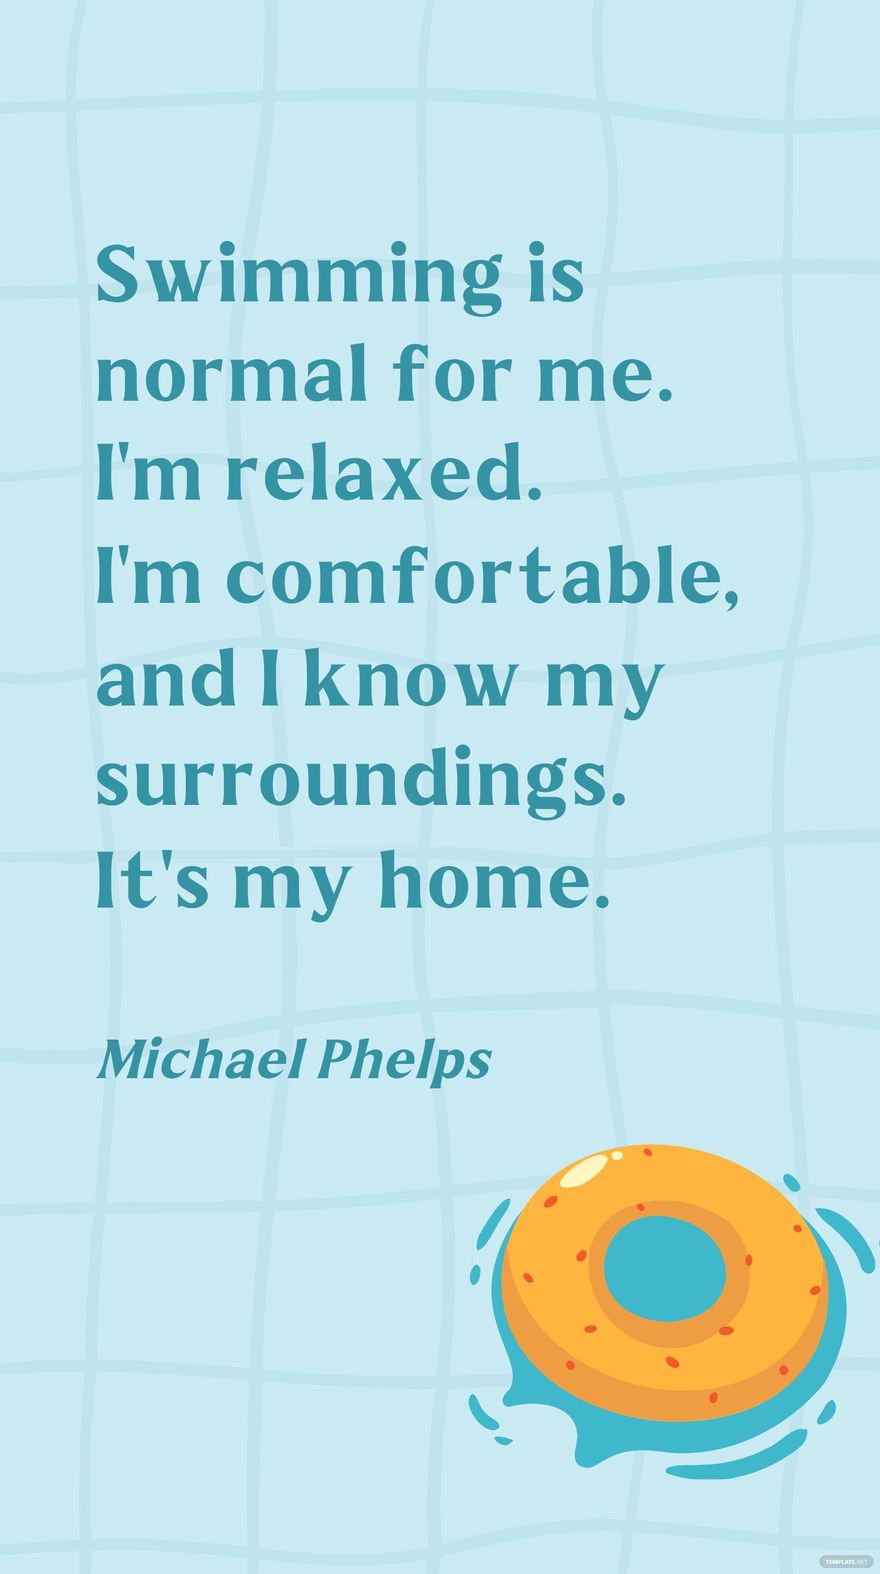 Free Michael Phelps - Swimming is normal for me. I'm relaxed. I'm comfortable, and I know my surroundings. It's my home. in JPG